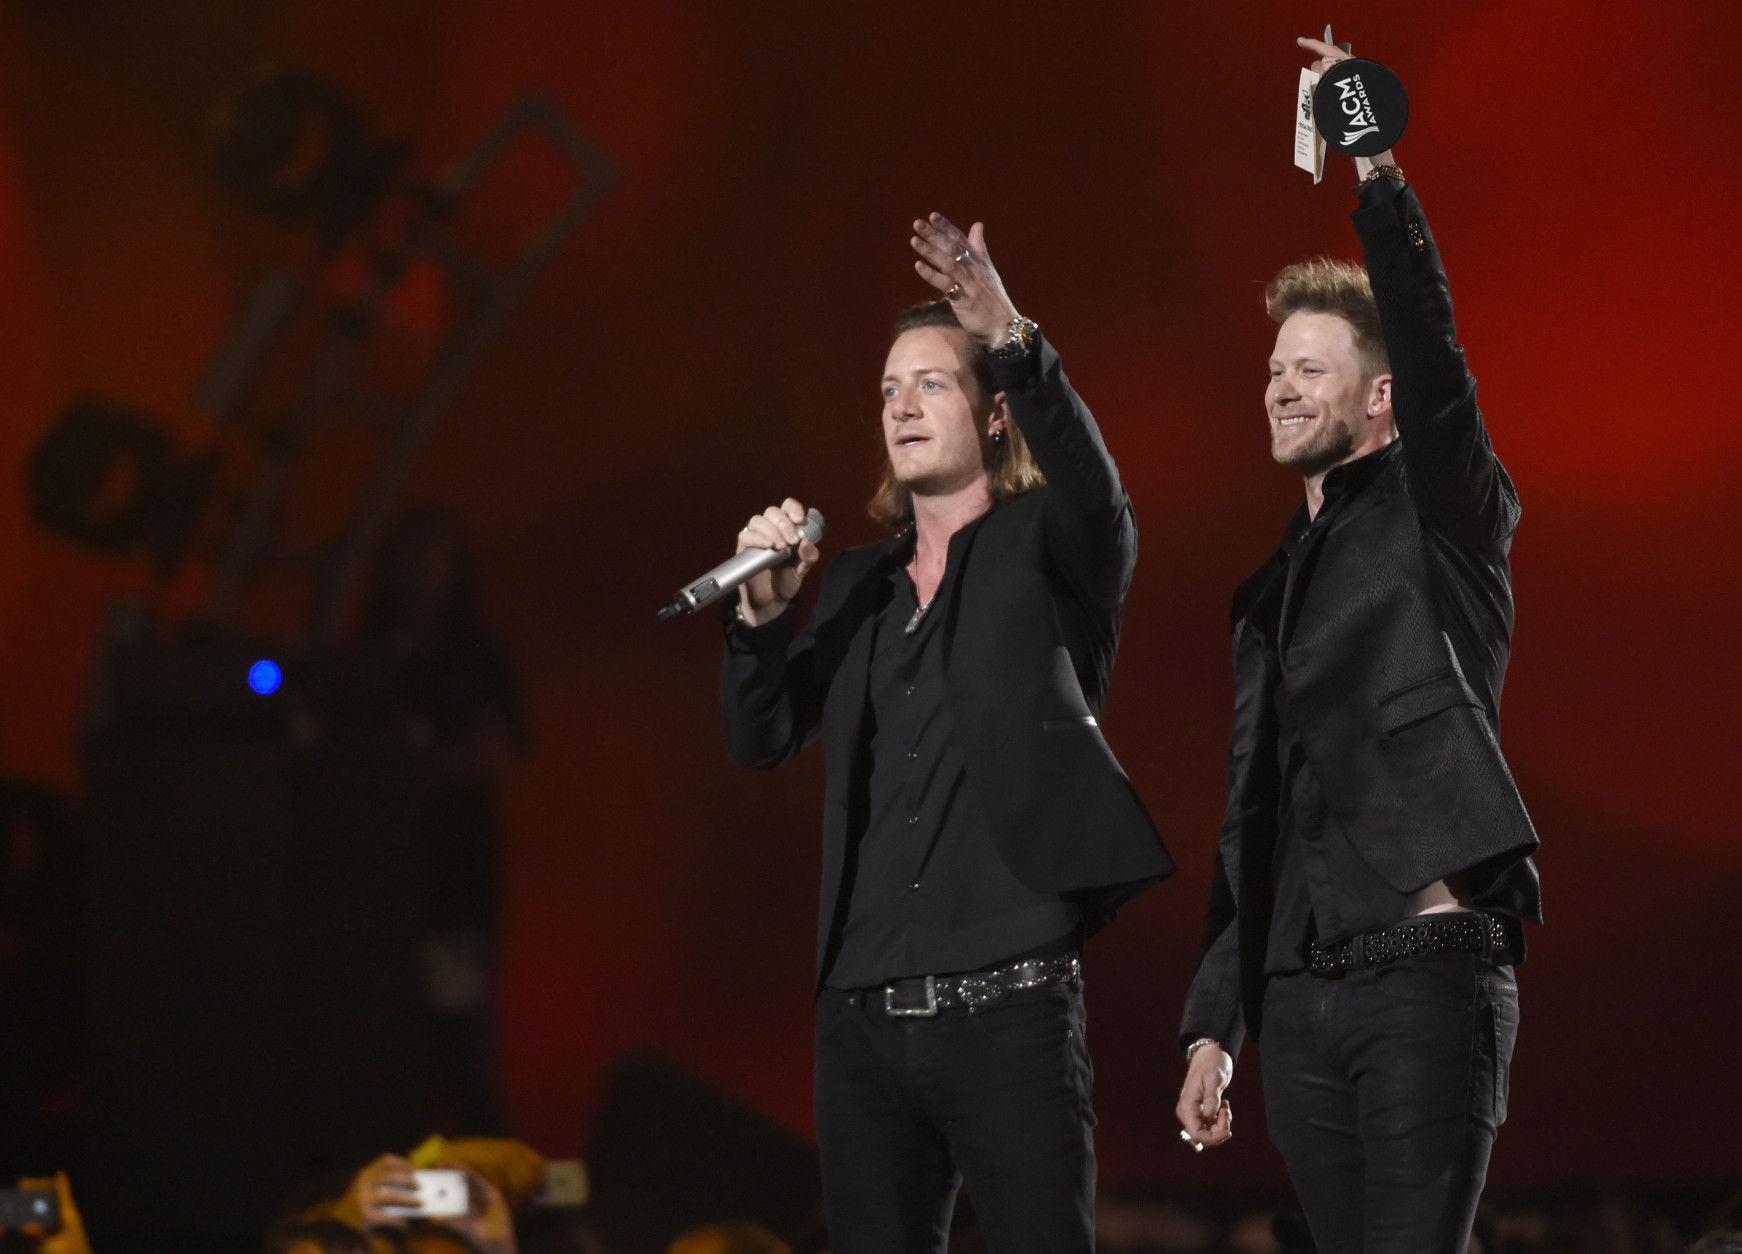 Tyler Hubbard, left, and Brian Kelley, of Florida Georgia Line, accept the award for vocal duo of the year at the 50th annual Academy of Country Music Awards at AT&amp;T Stadium on Sunday, April 19, 2015, in Arlington, Texas. (Photo by Chris Pizzello/Invision/AP)